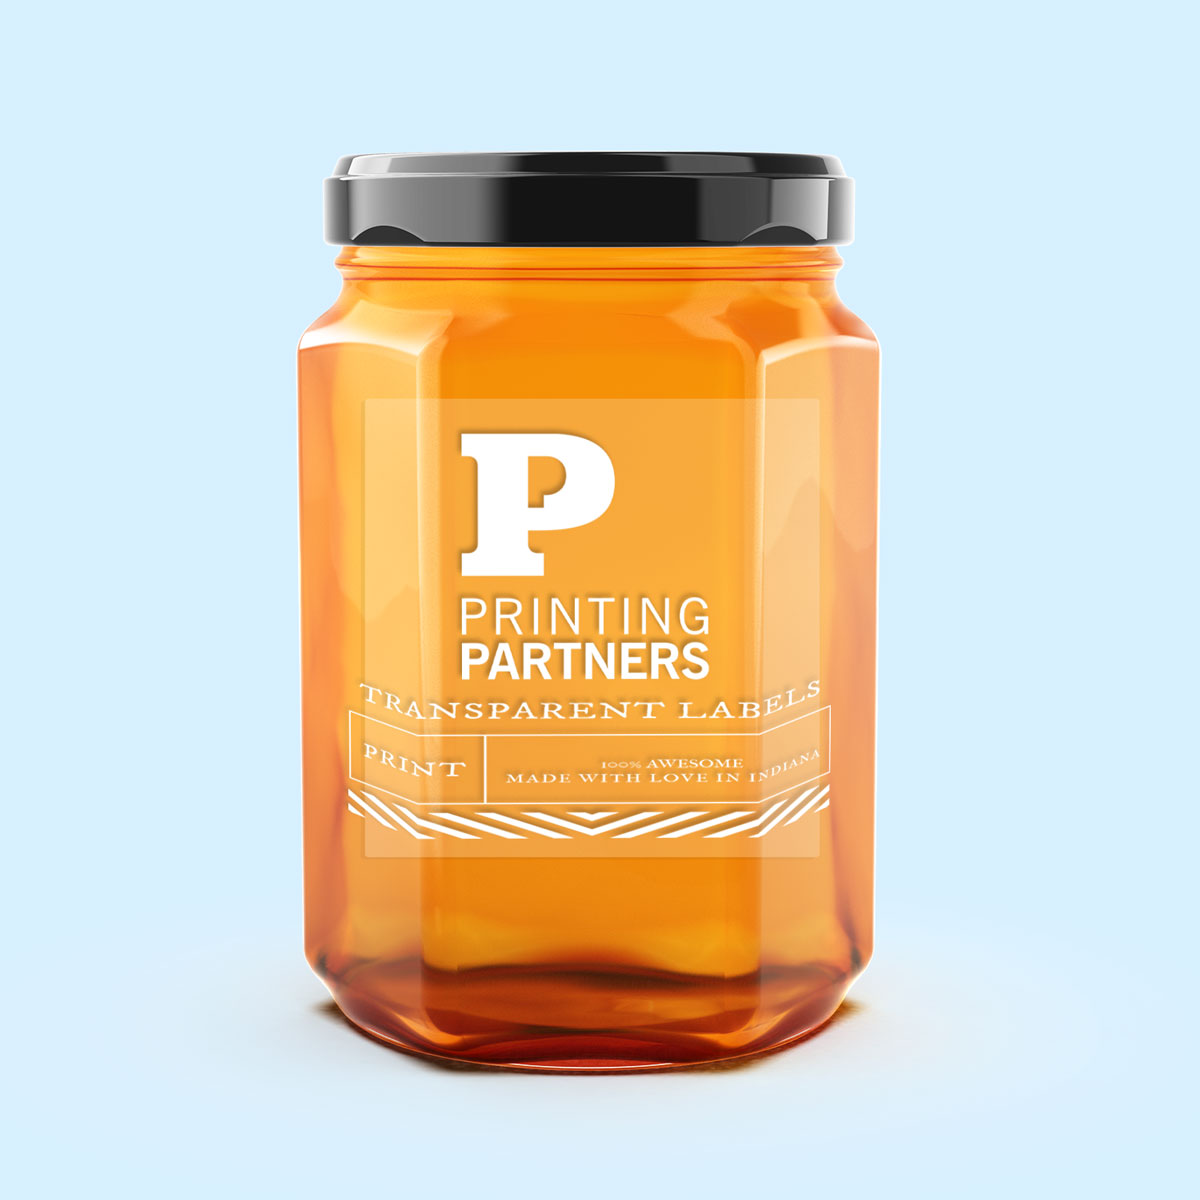 Clear Label on Jar Printed with White Ink